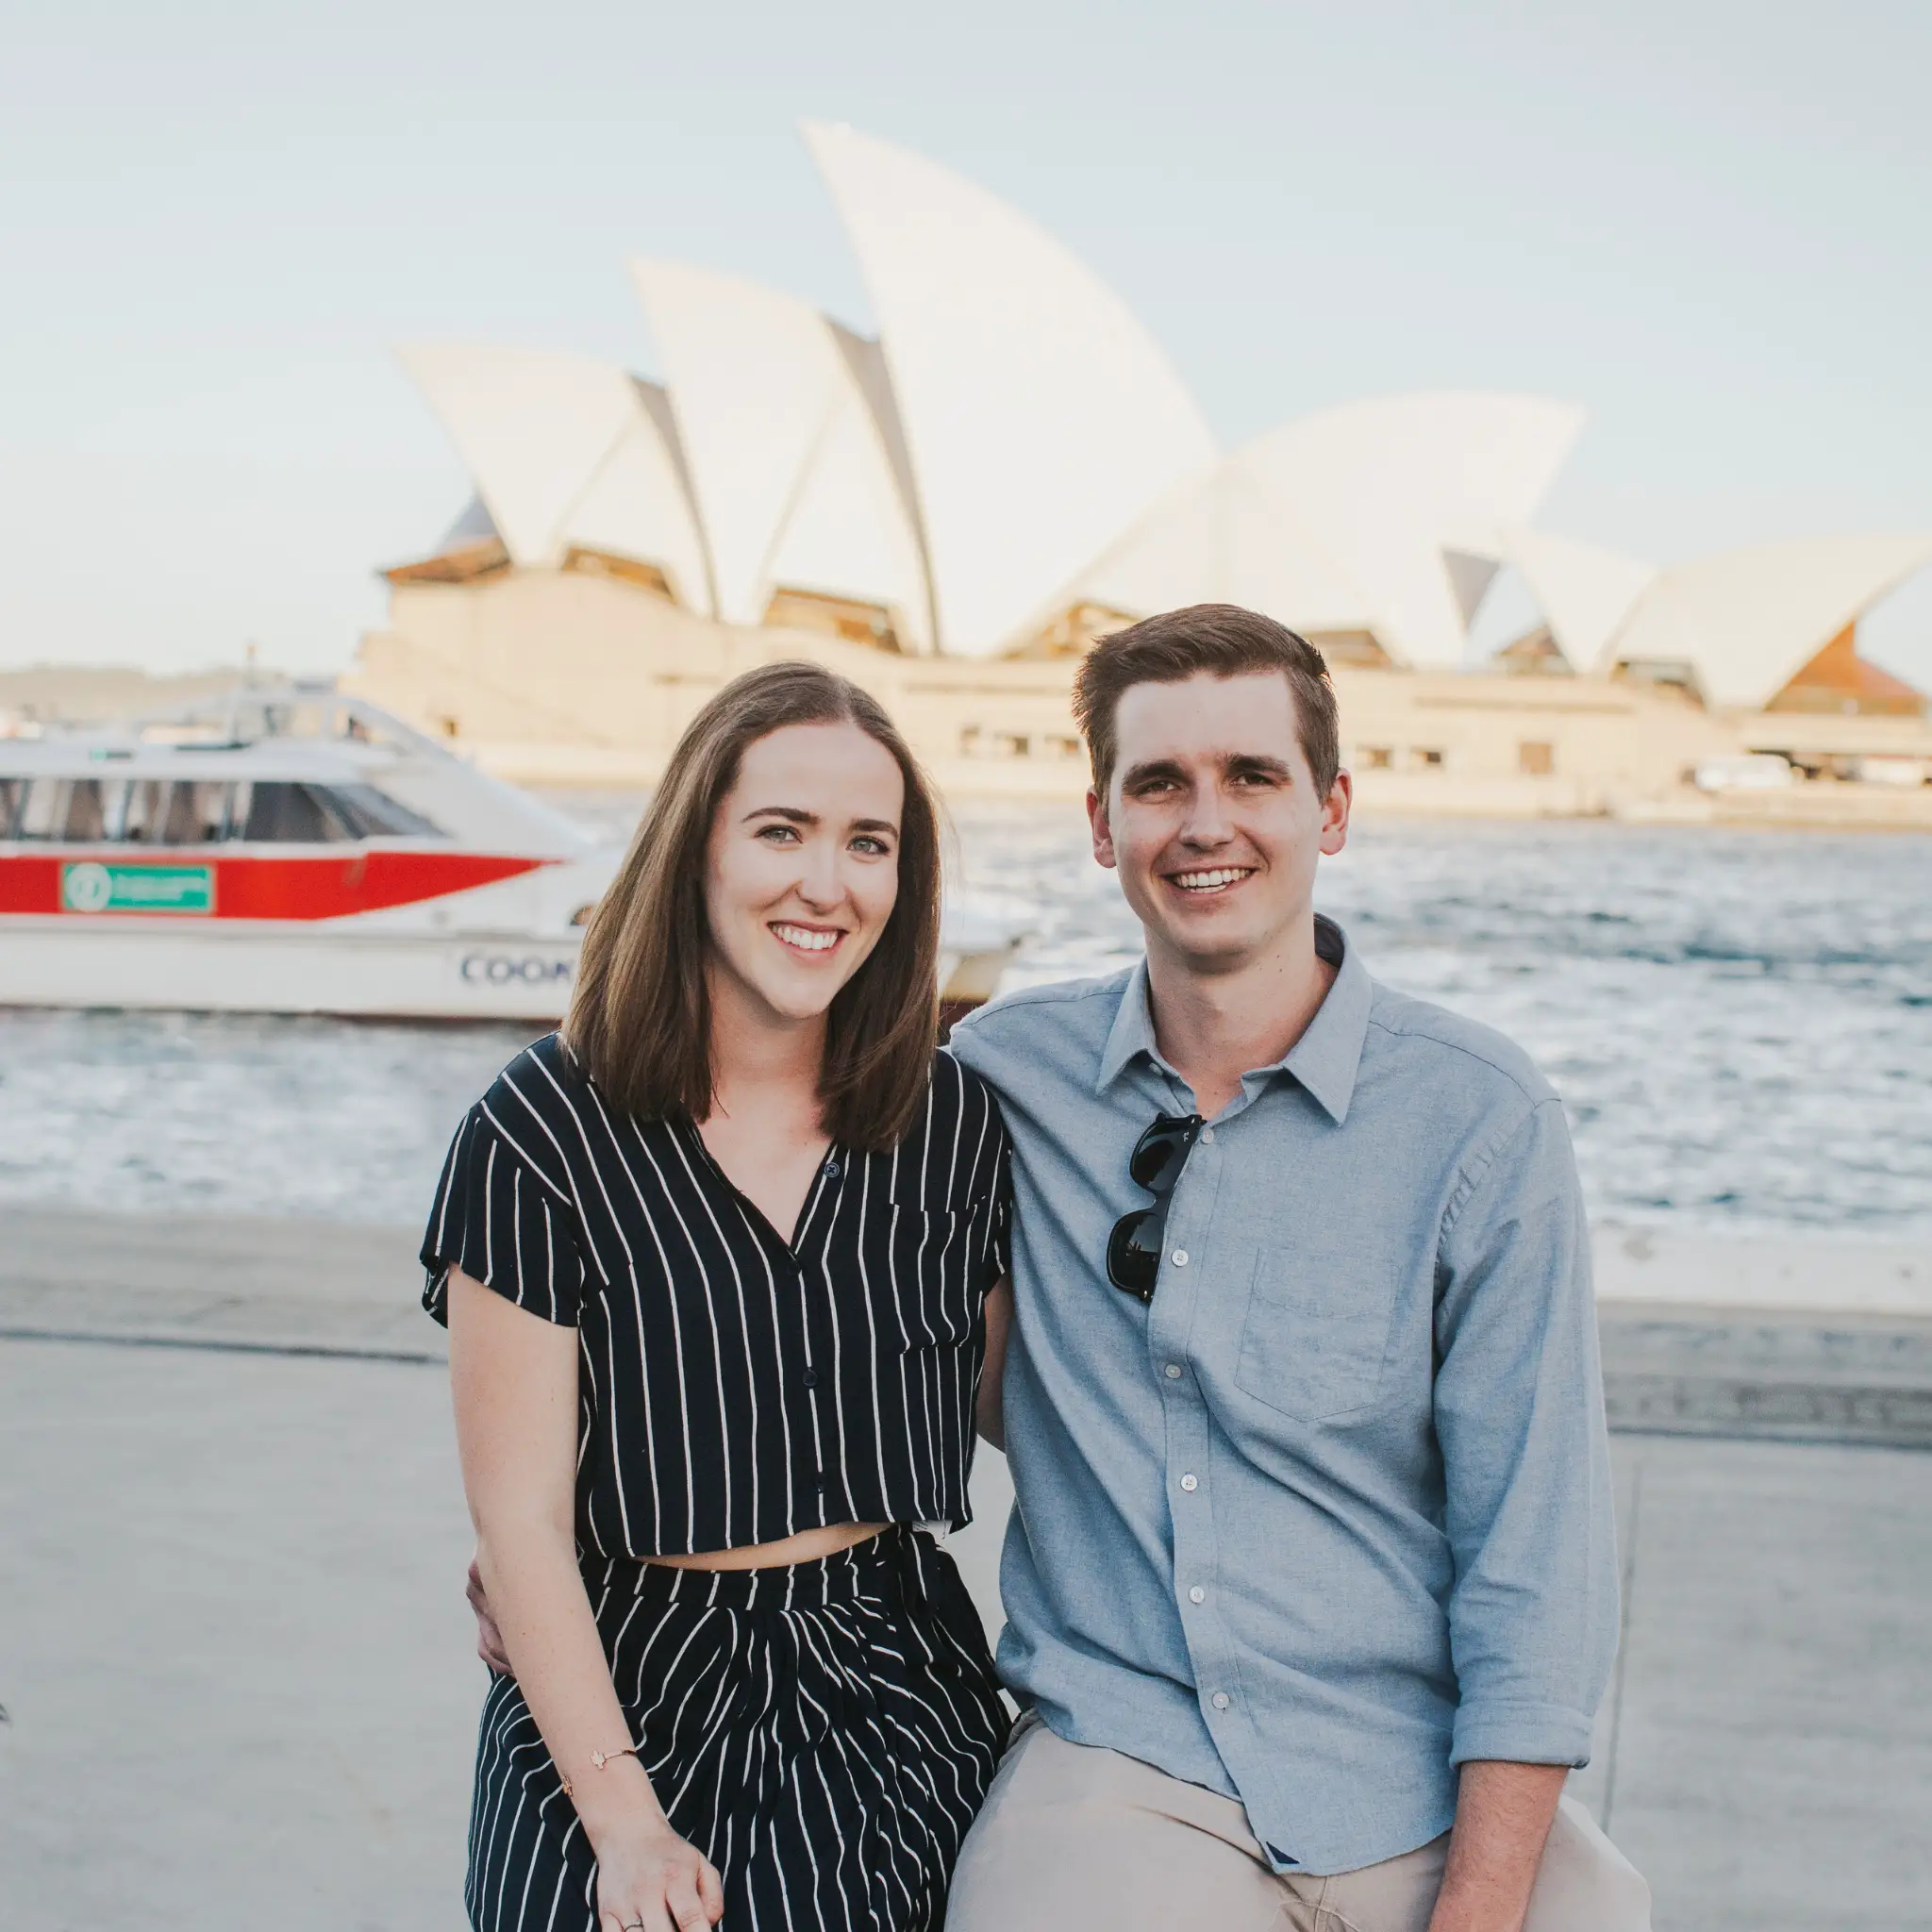 Proposal photoshoot by Steven, Localgrapher in Sydney